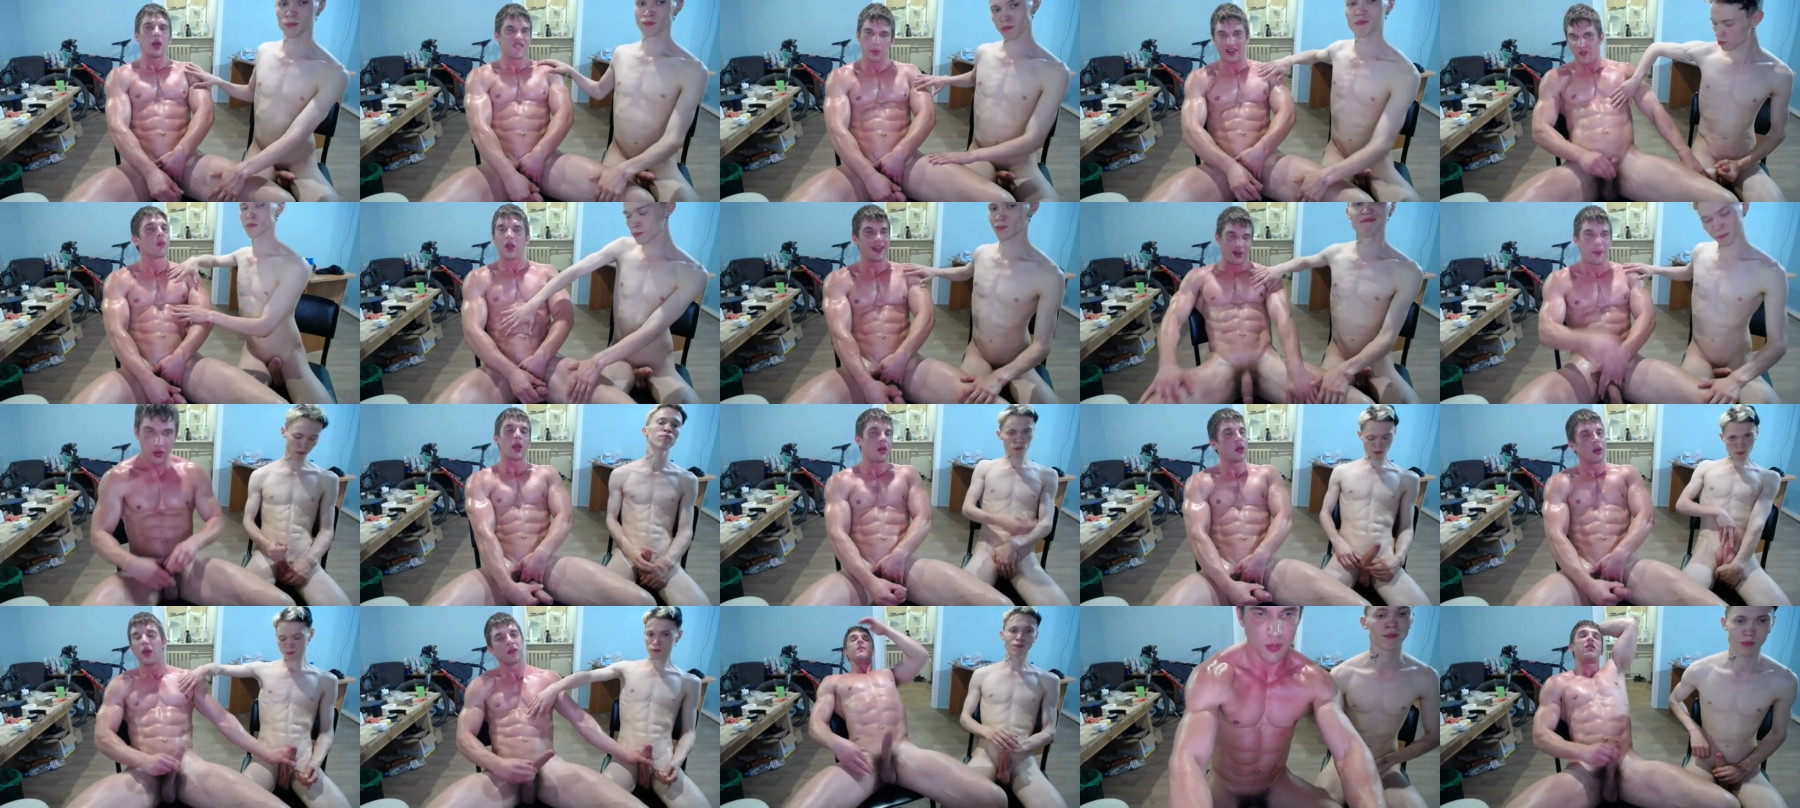 Max_232  23-05-2021 Male Topless